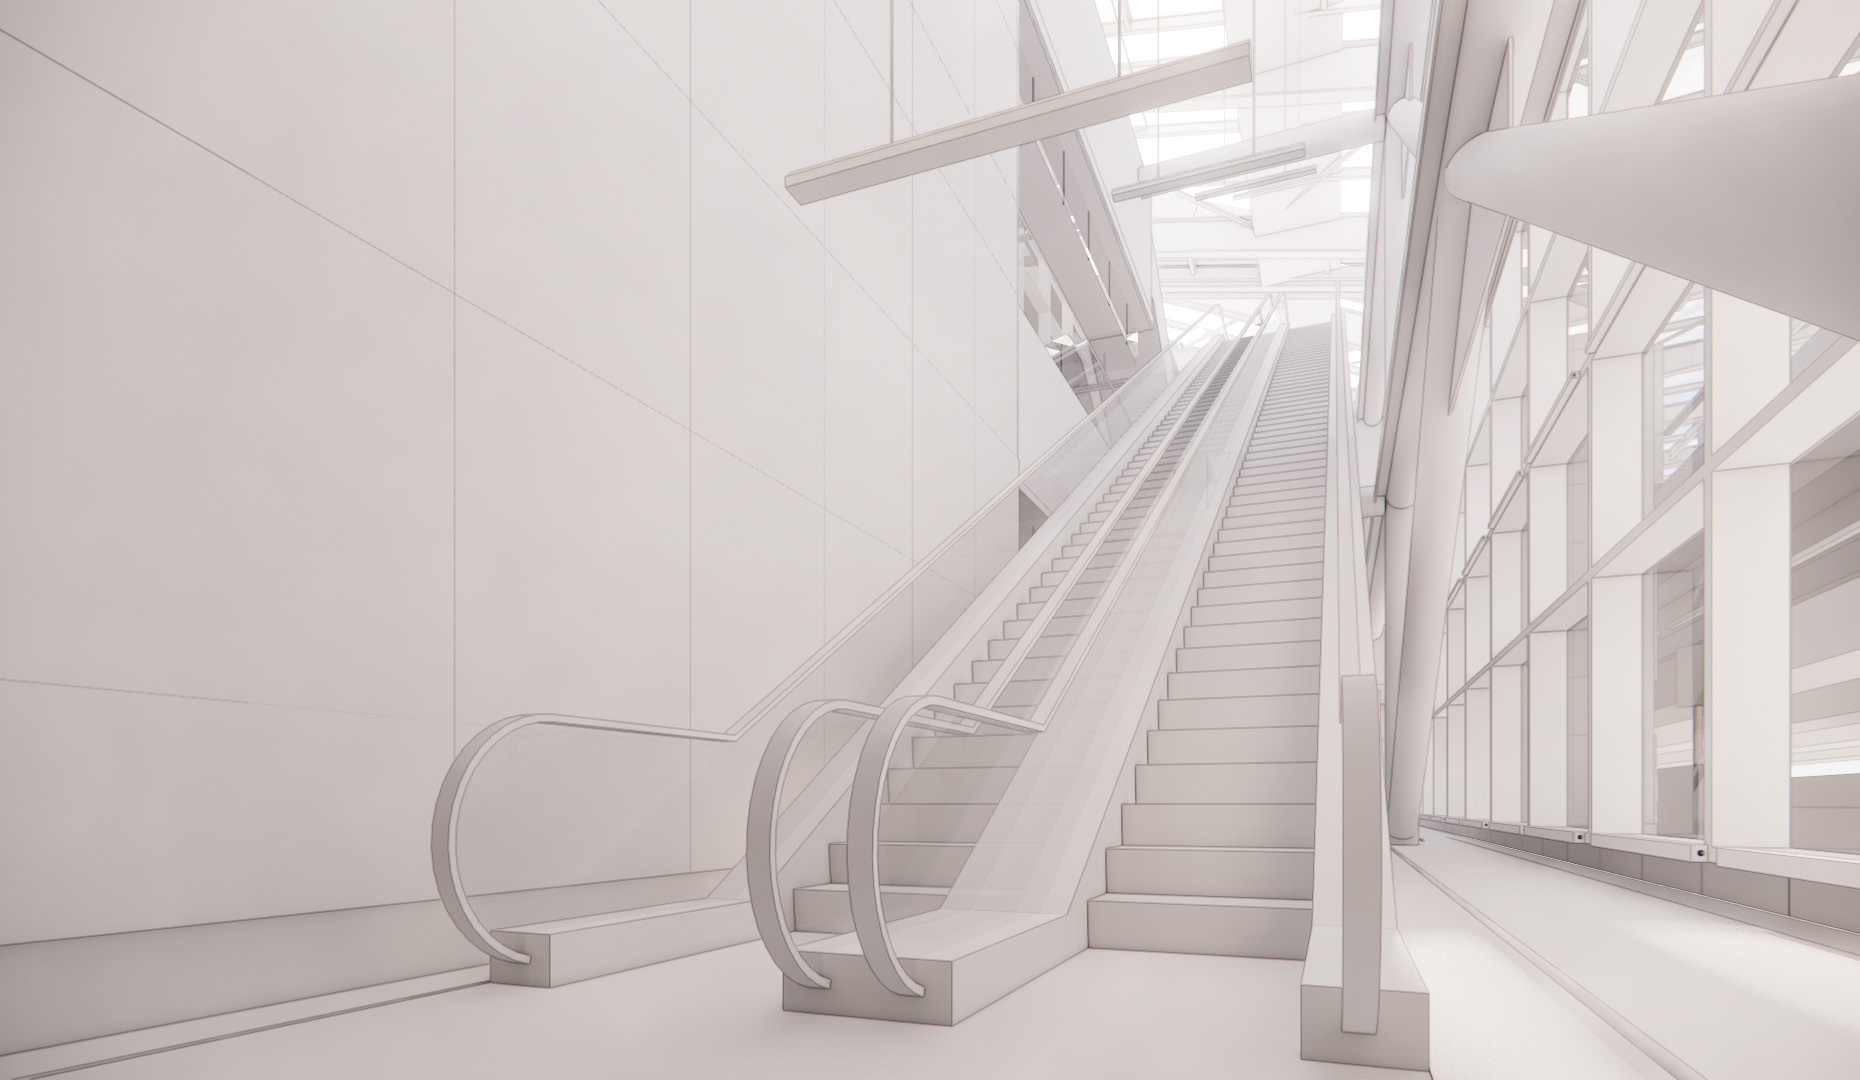 Monotone rendered image of an escalator. The escalator is viewed from a roughly three quarters angle from its lower level.